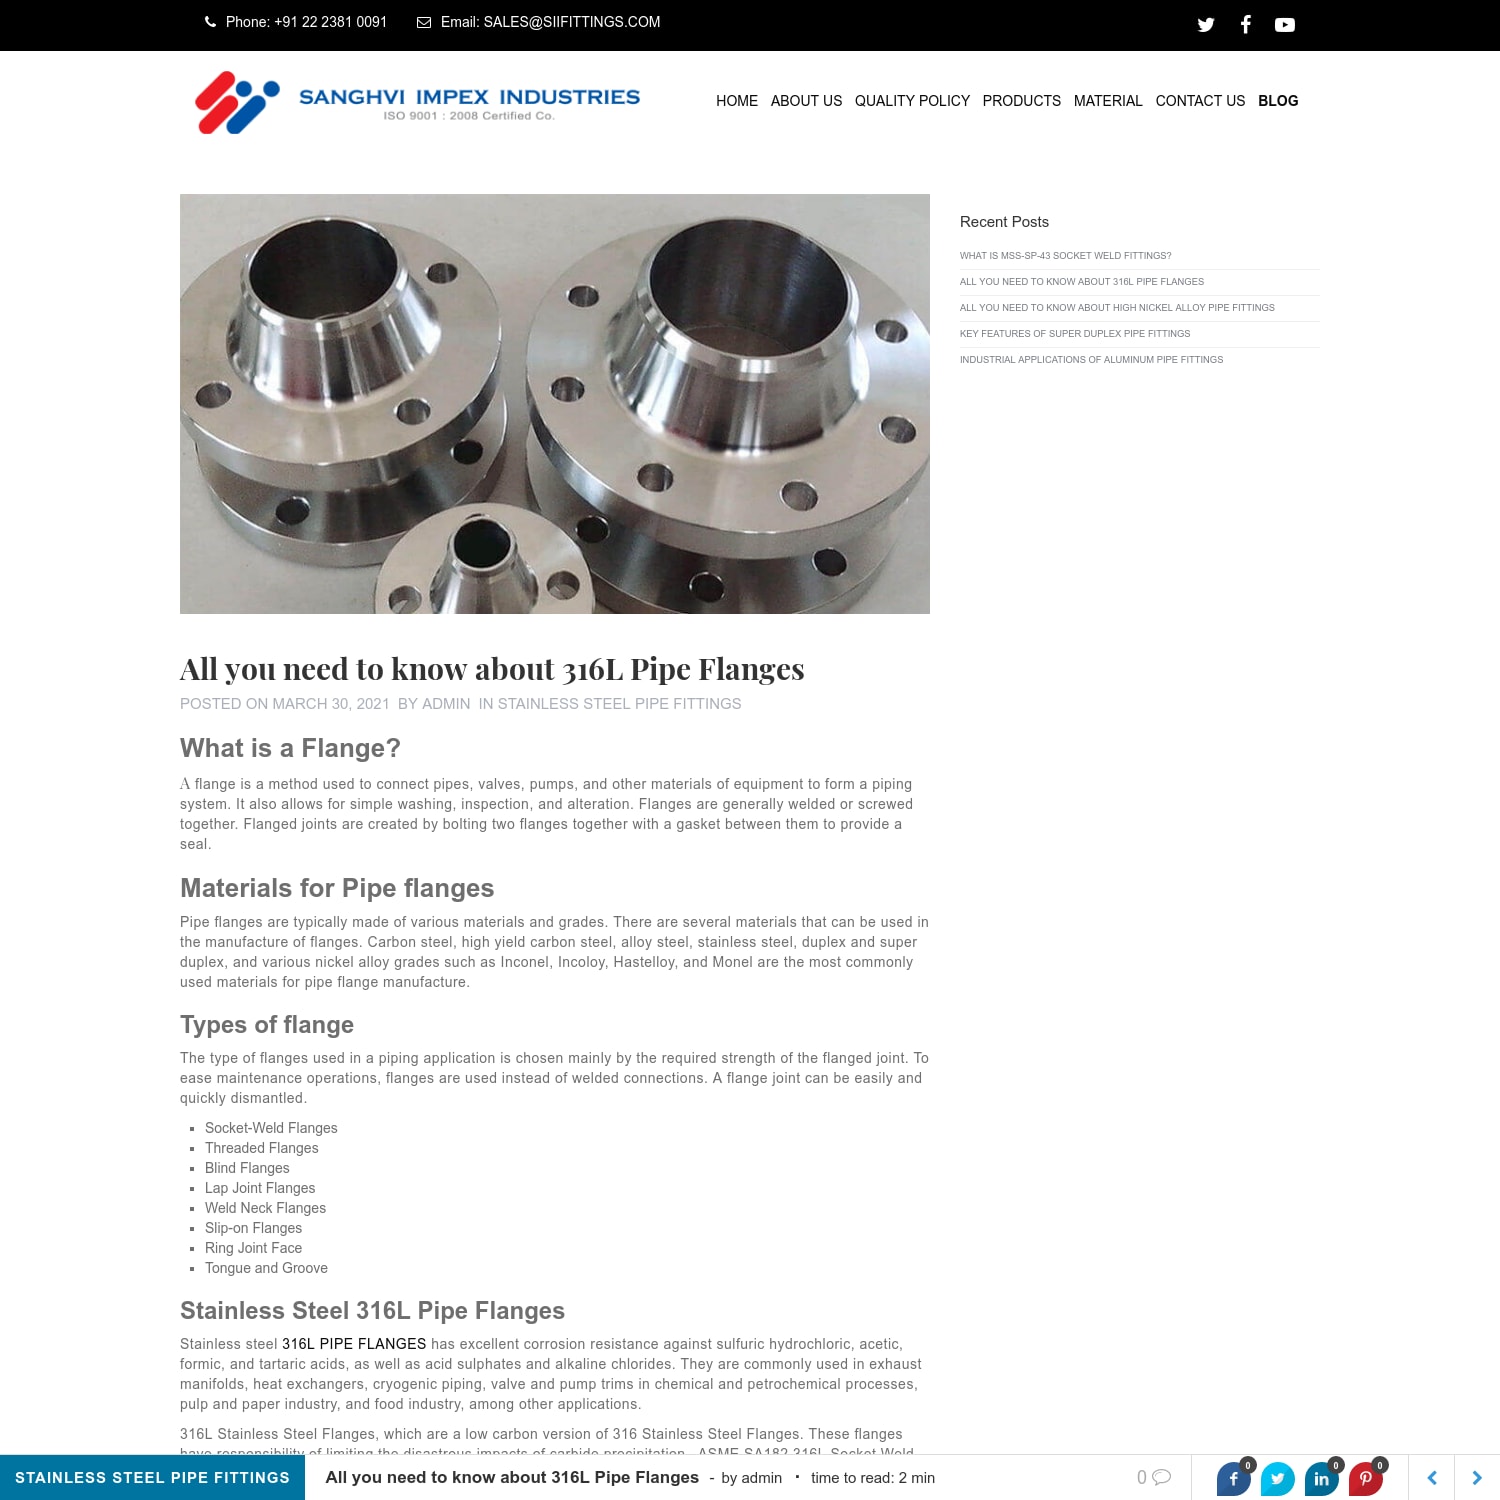 All you need to know about 316L Pipe Flanges